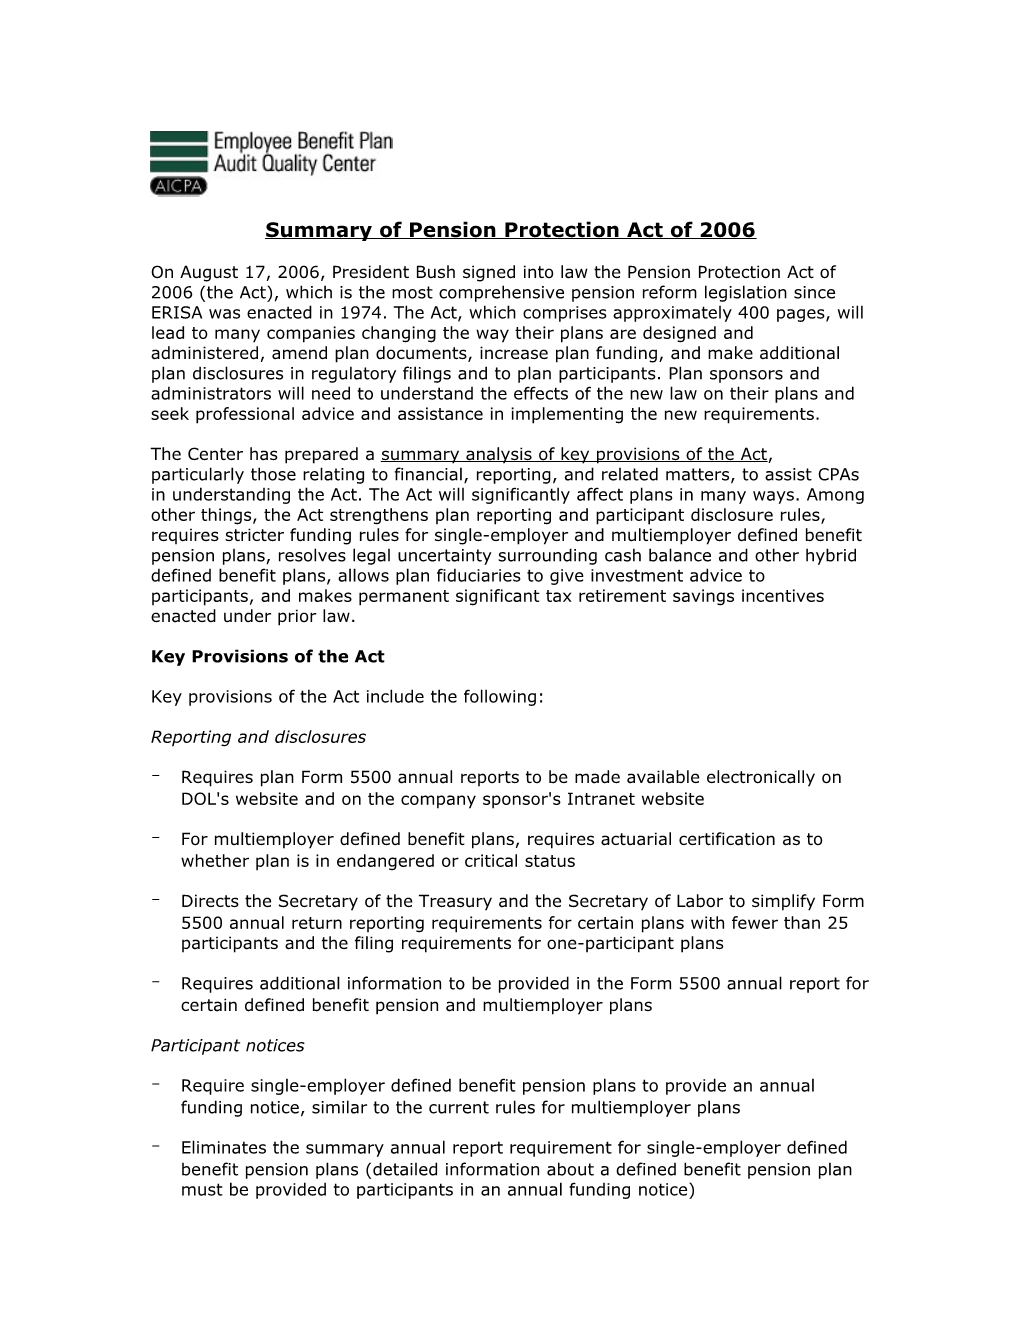 Summary of Pension Protection Act of 2006